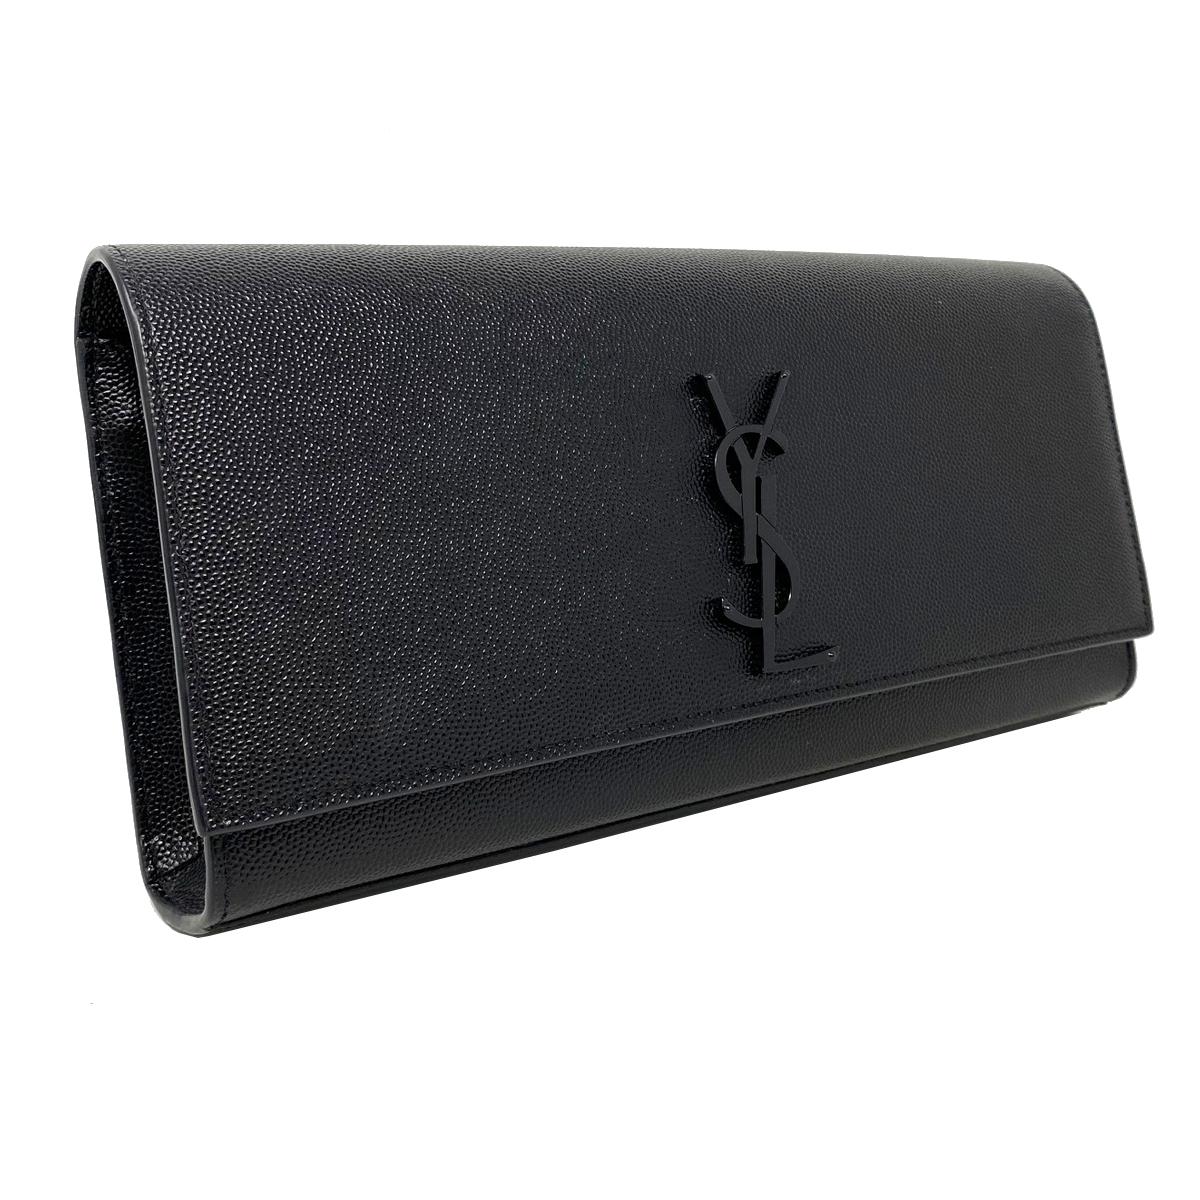 Company-Yves Saint Laurent 
Model- Kate Leather Clutch 
Color-Black  
Date Code-PTR230791216
Material-Pebbled leather clutch 
Measurements-9.5